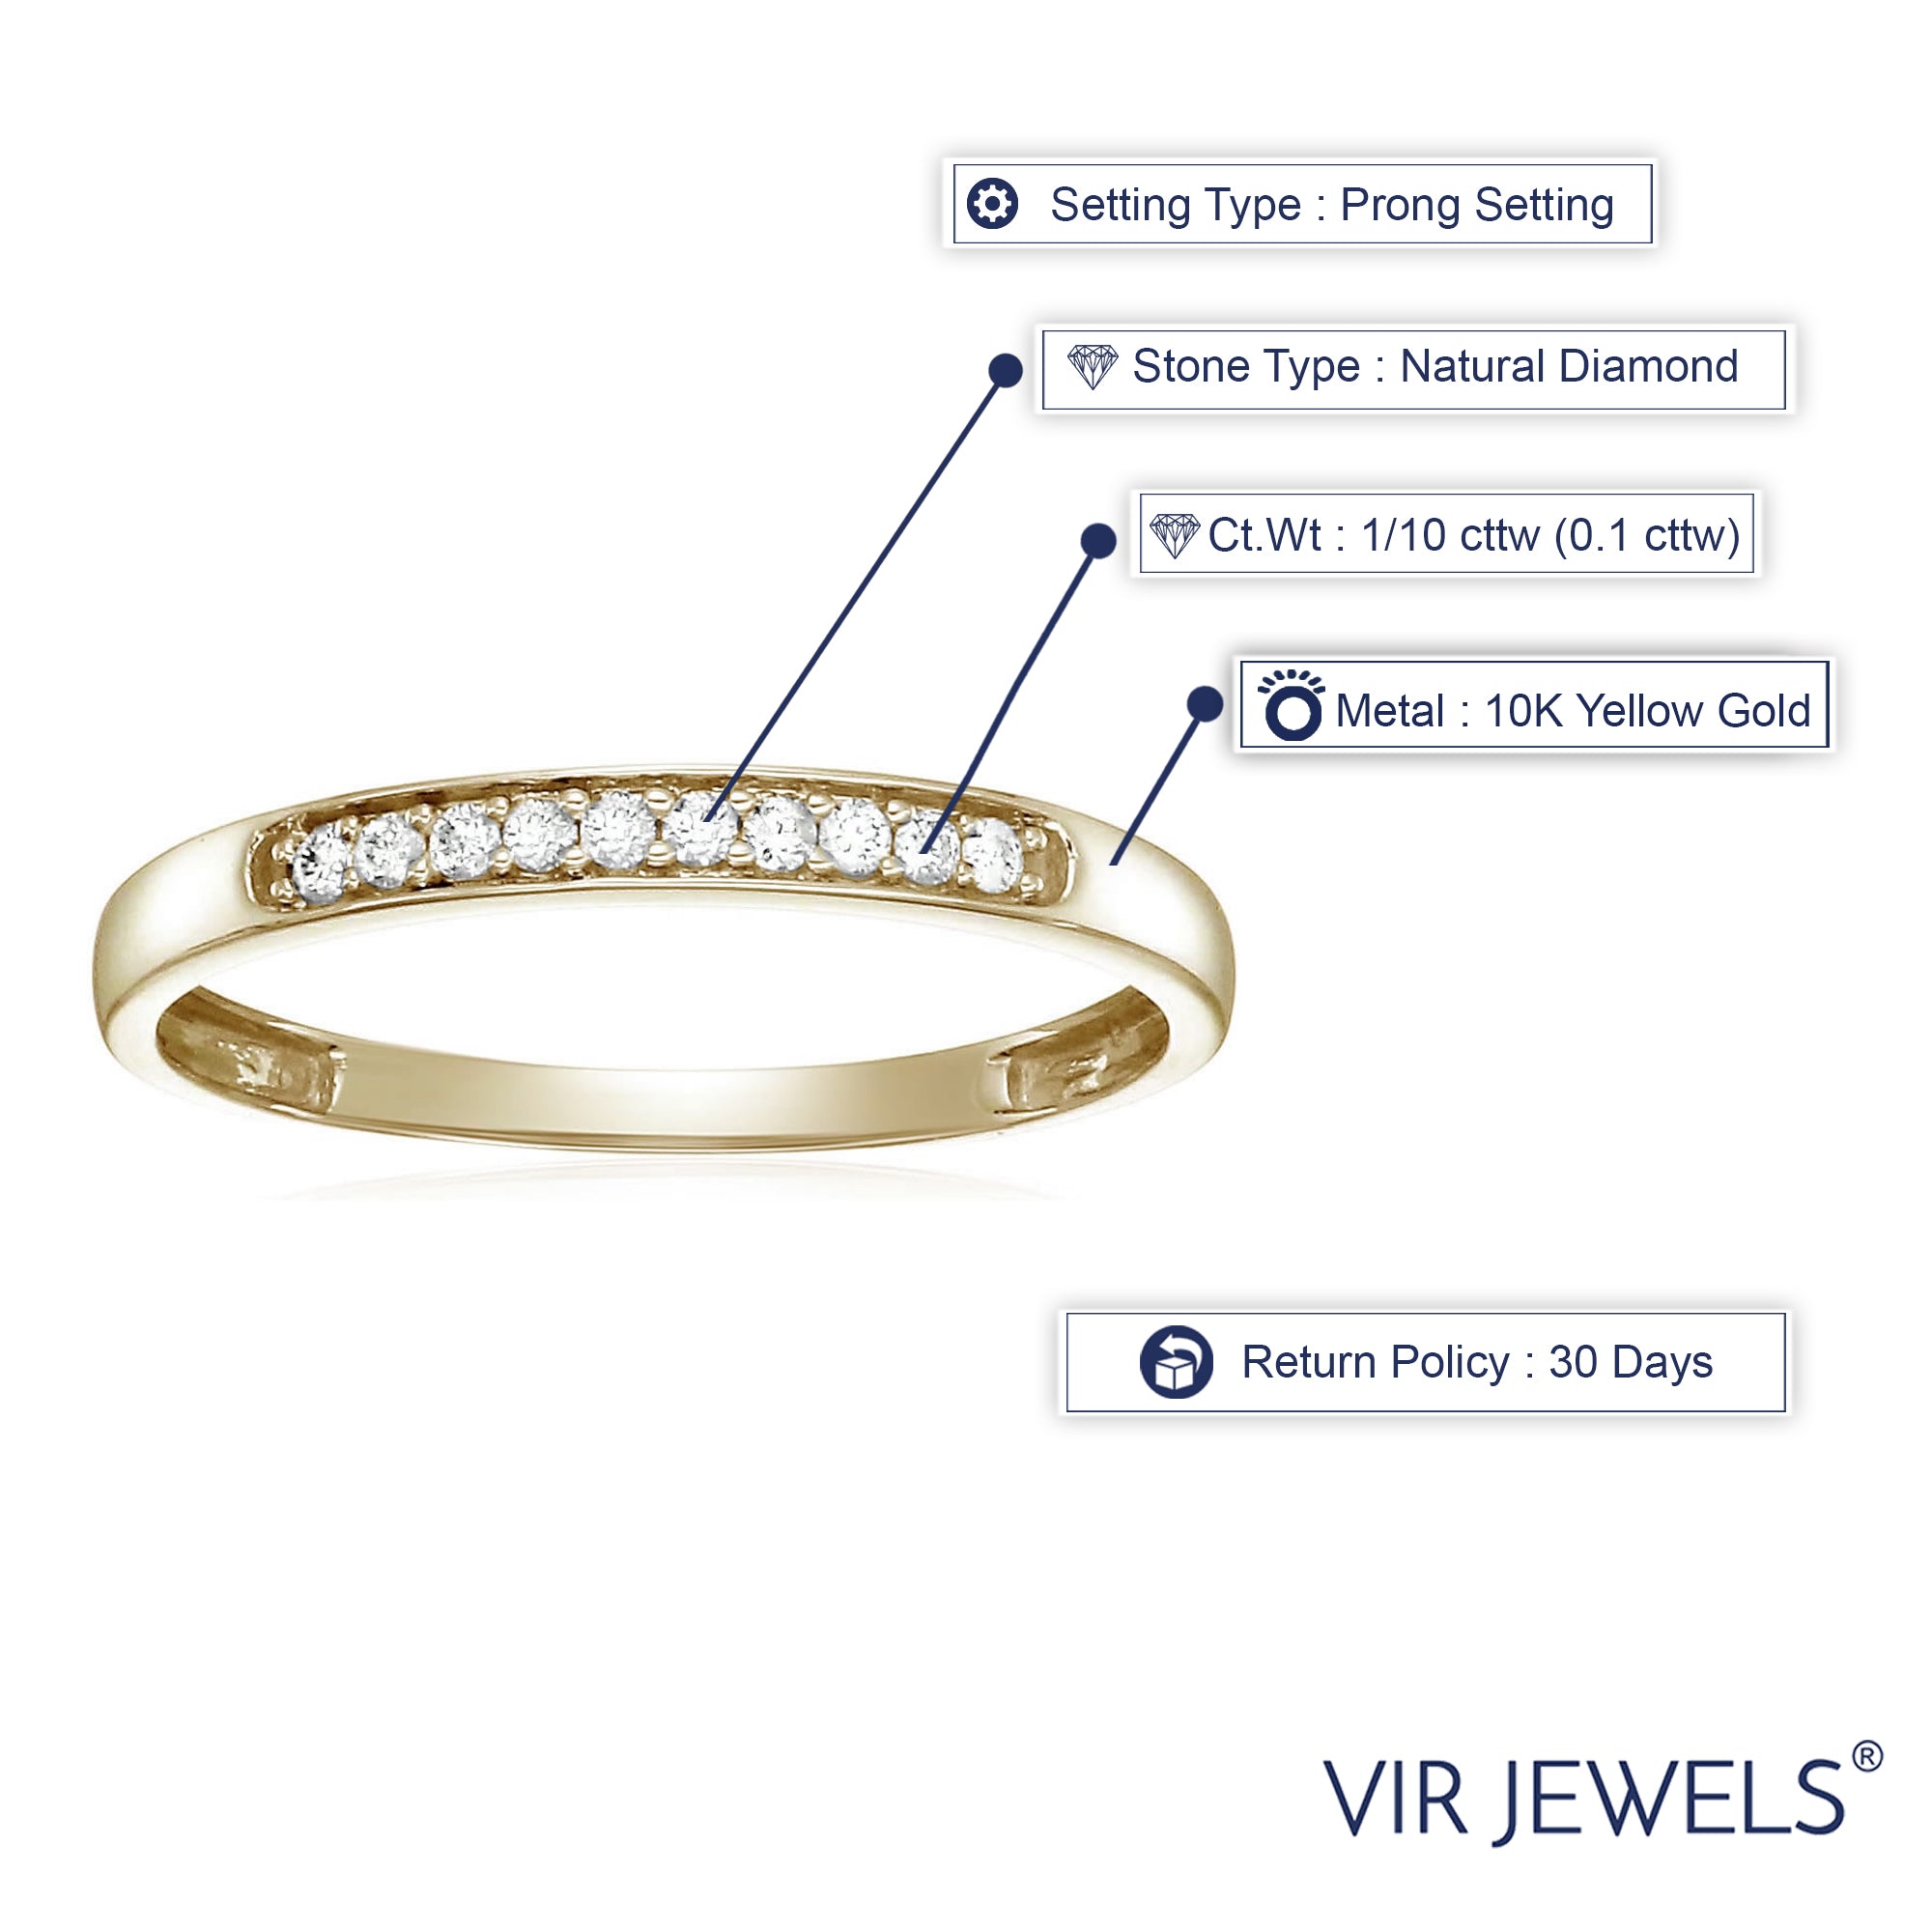 1/10 cttw Diamond Wedding Band for Women, 10K Yellow Gold Wedding Band with 10 Stones Prong Set, Size 4.5-10